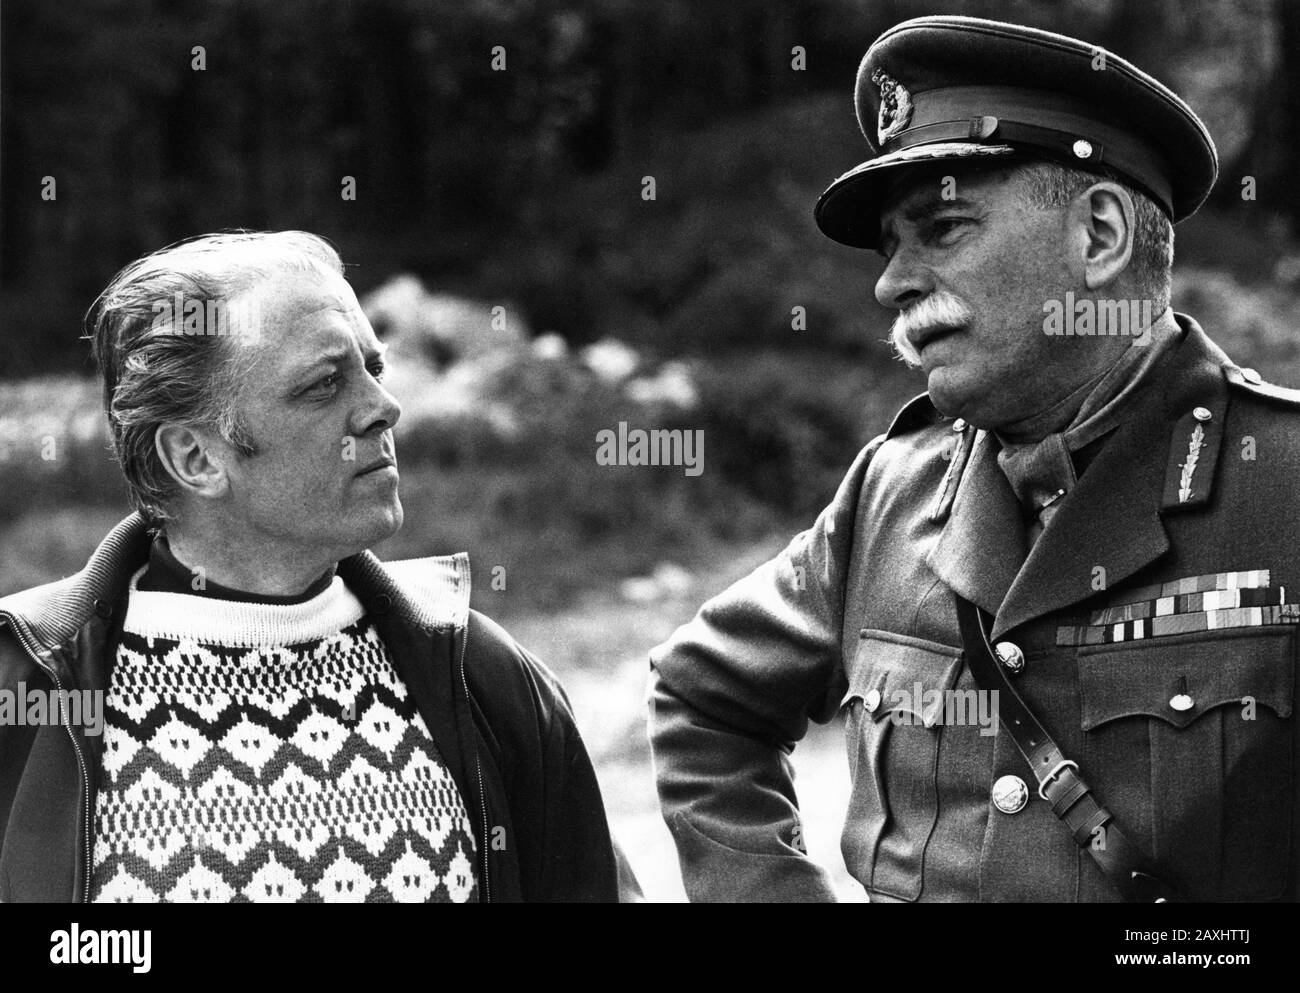 Director RICHARD ATTENBOROUGH and LAURENCE OLIVIER in costume as Field Marshal Sir John French on set location candid filming OH ! WHAT A LOVELY WAR 1969 based on Joan Littlewood's Theatre Workshop Production Accord Productions / Paramount British Pictures Stock Photo